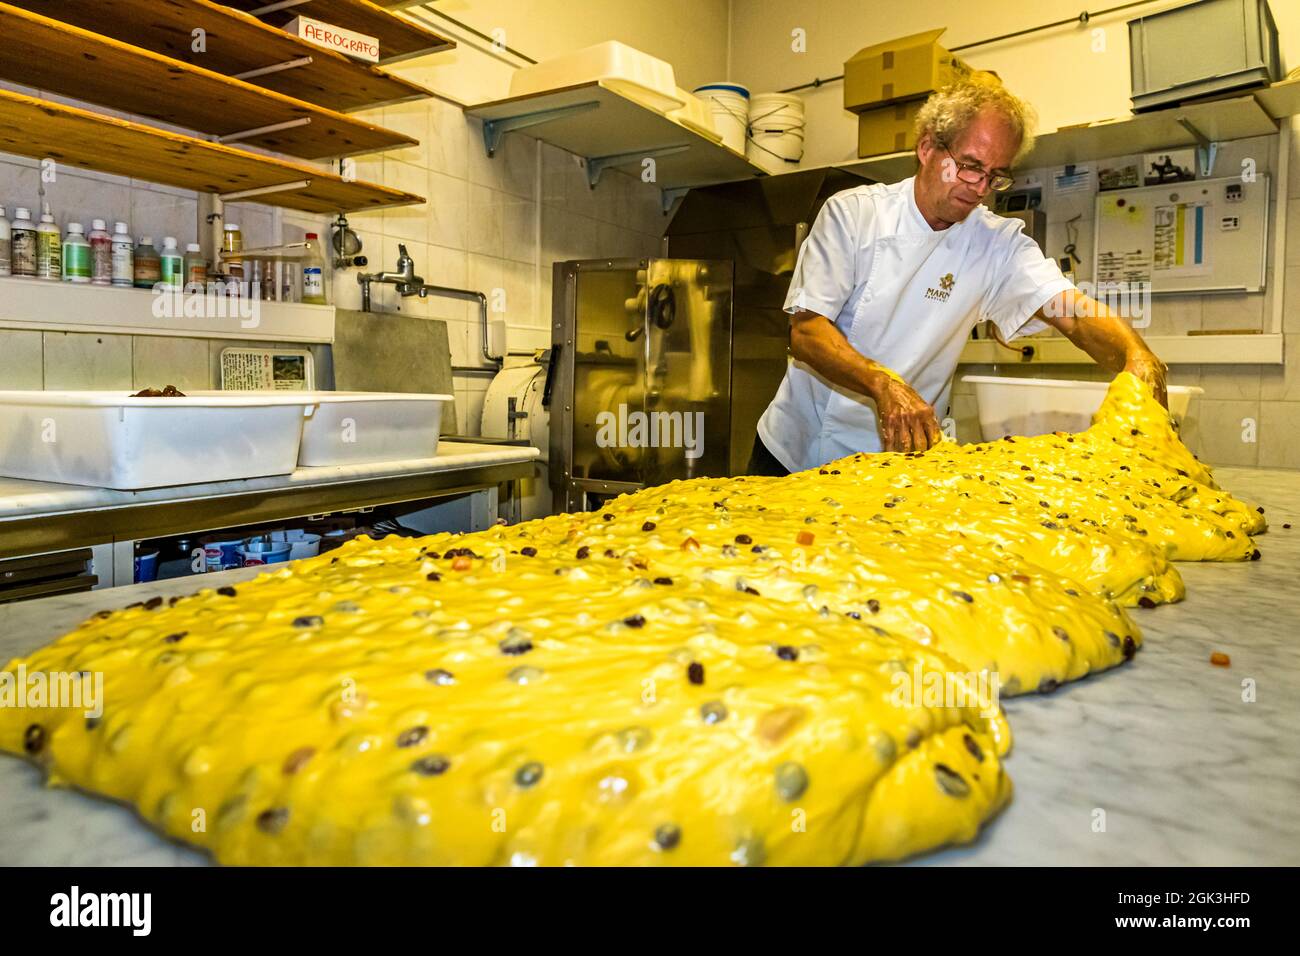 Panettone Prduction in the Pasticceria Marnin in Locarno, Switzerland. Circolo di Locarno, Switzerland. Here the main dough rests for the first time after coming out of the kneading machine in the Pasticceria Marnin in Locarno, Switzerland Stock Photo